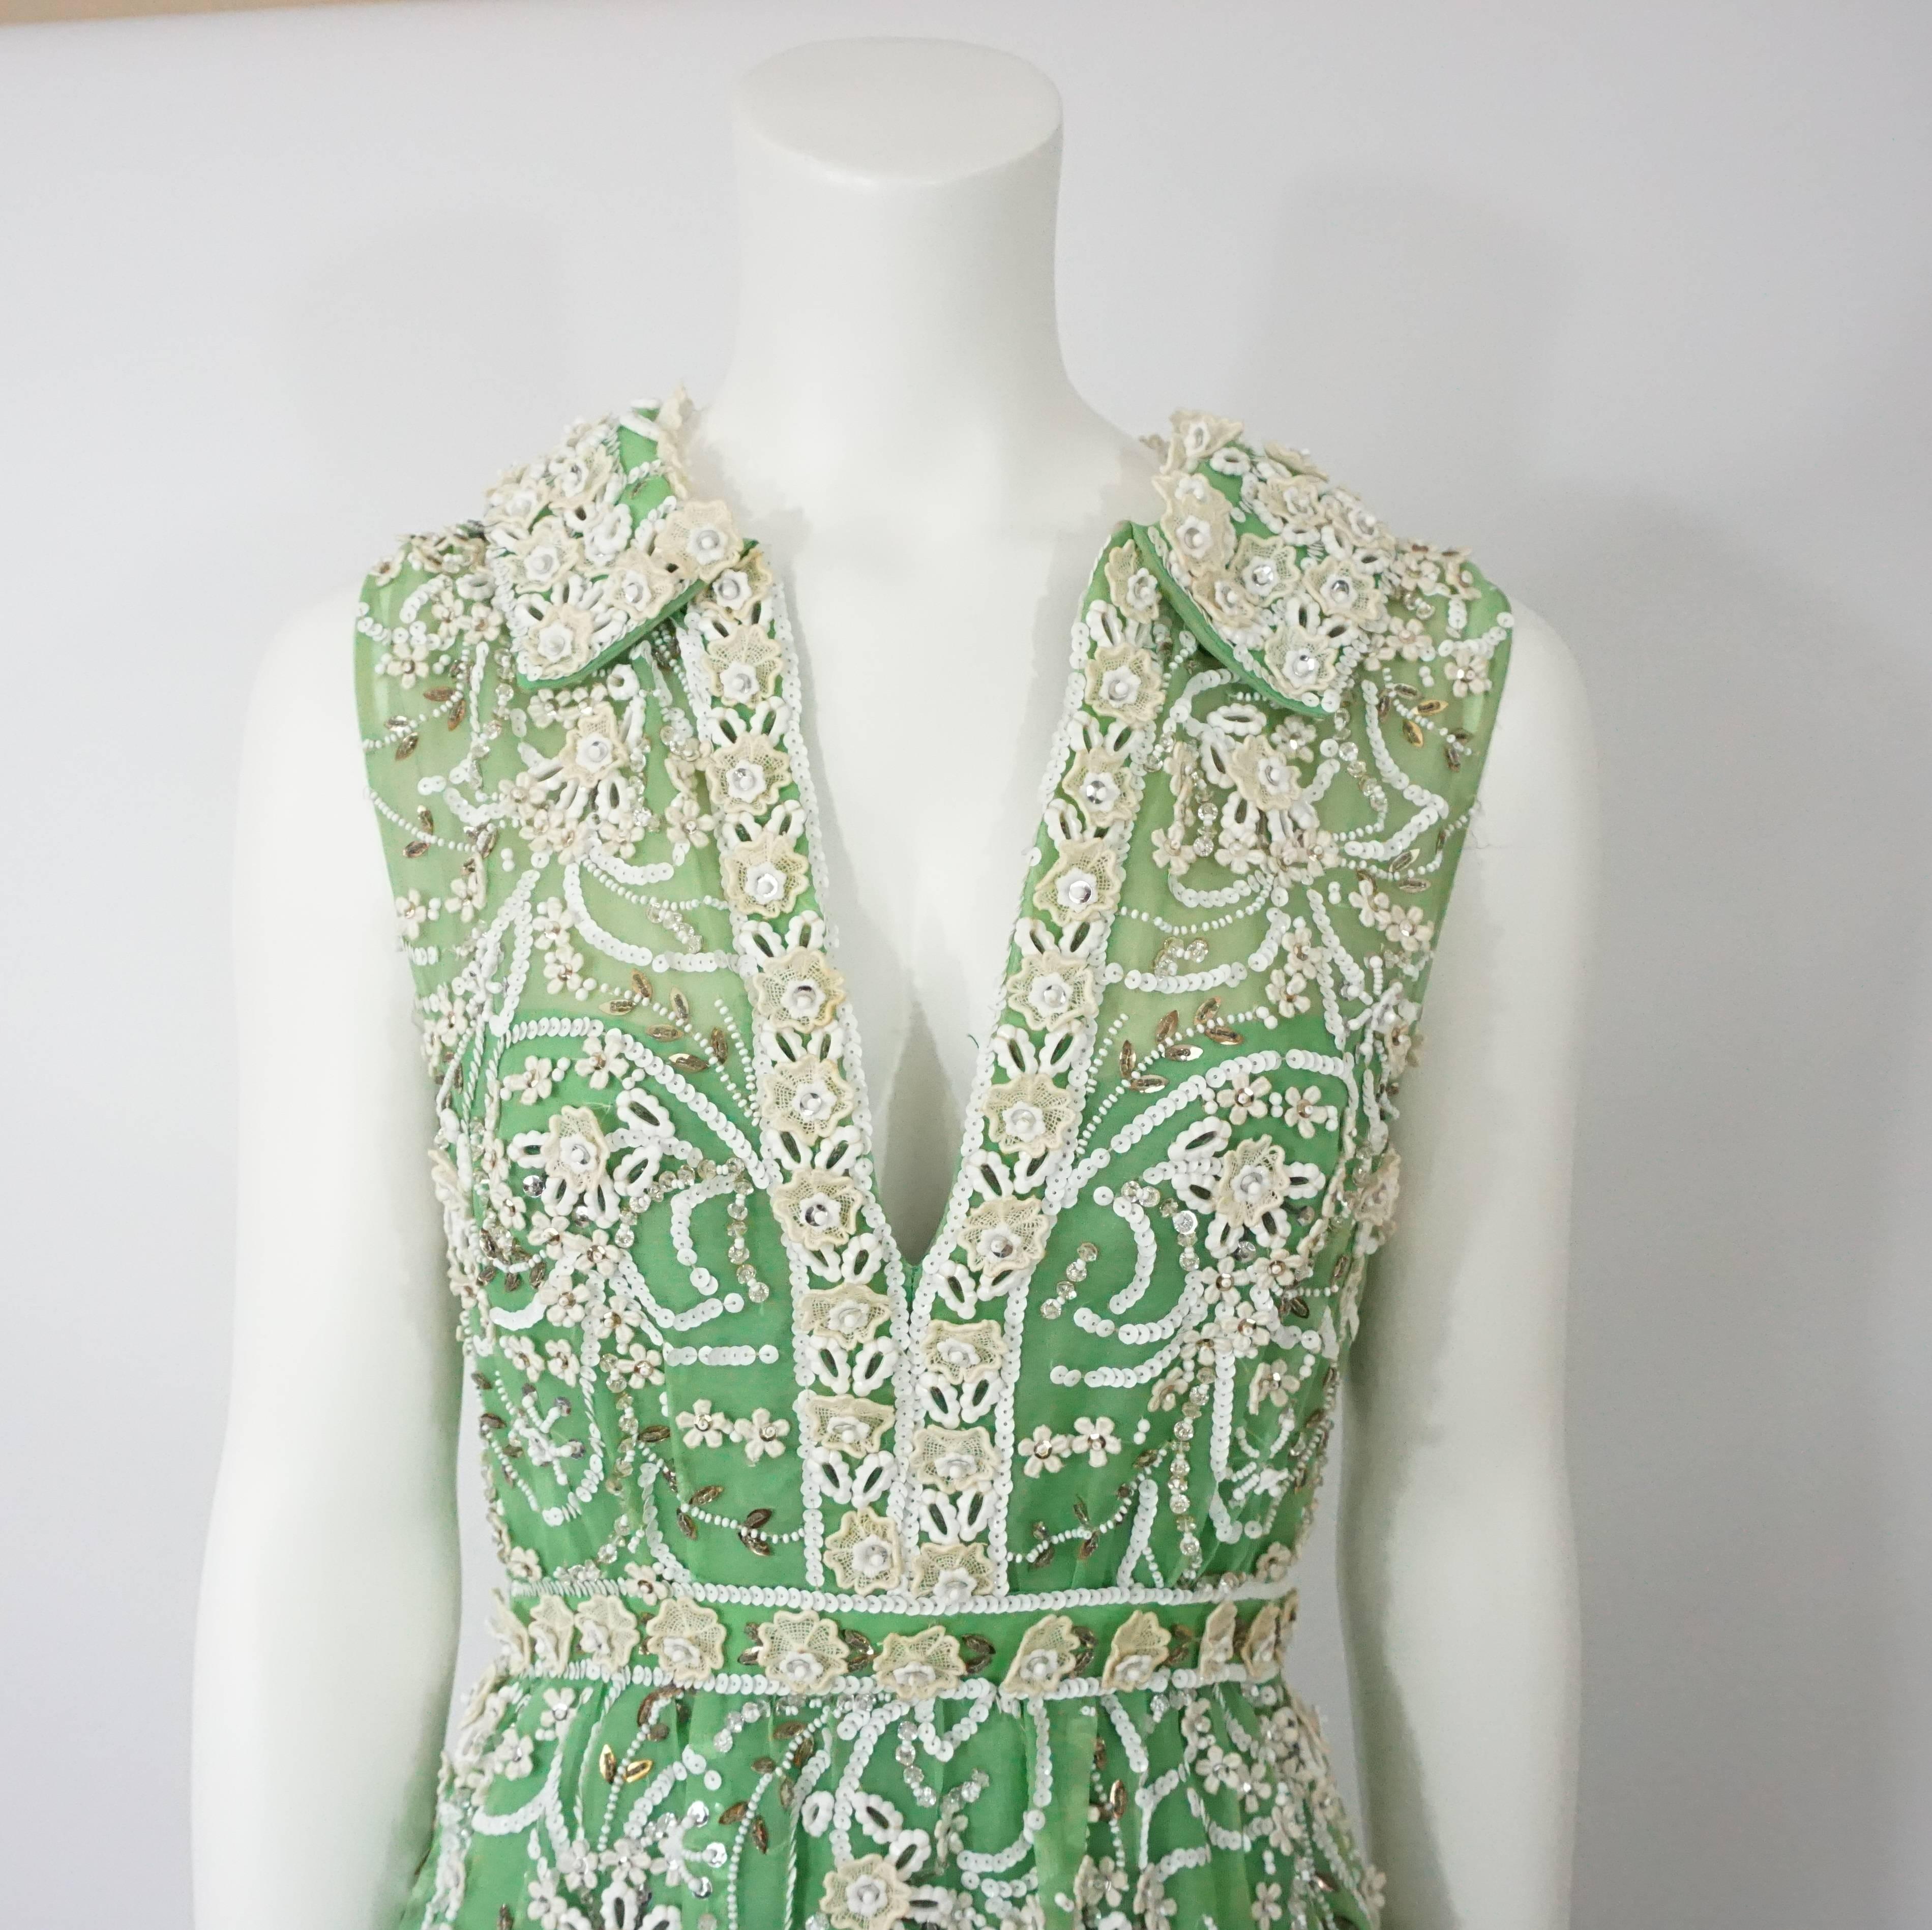 Malcolm Starr Heavily Beaded Green Silk Organza Gown, Circa 1970s In Excellent Condition For Sale In West Palm Beach, FL